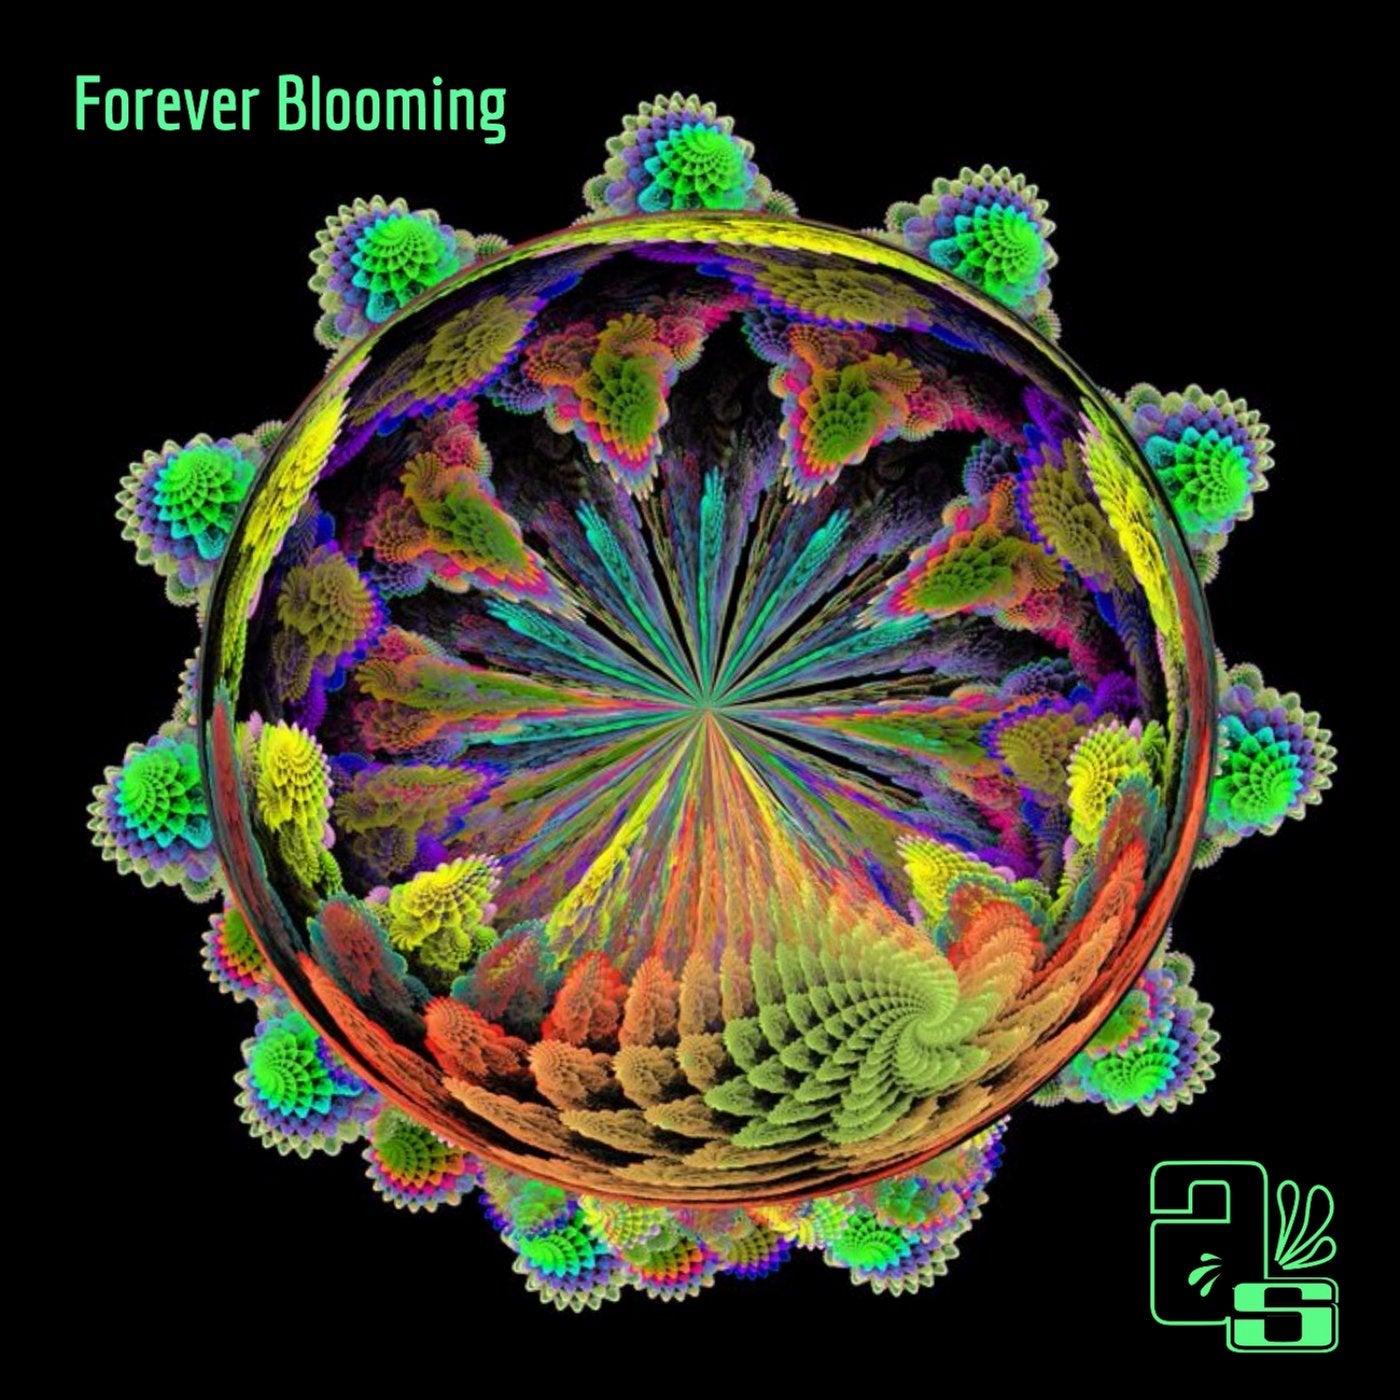 Forever Blooming